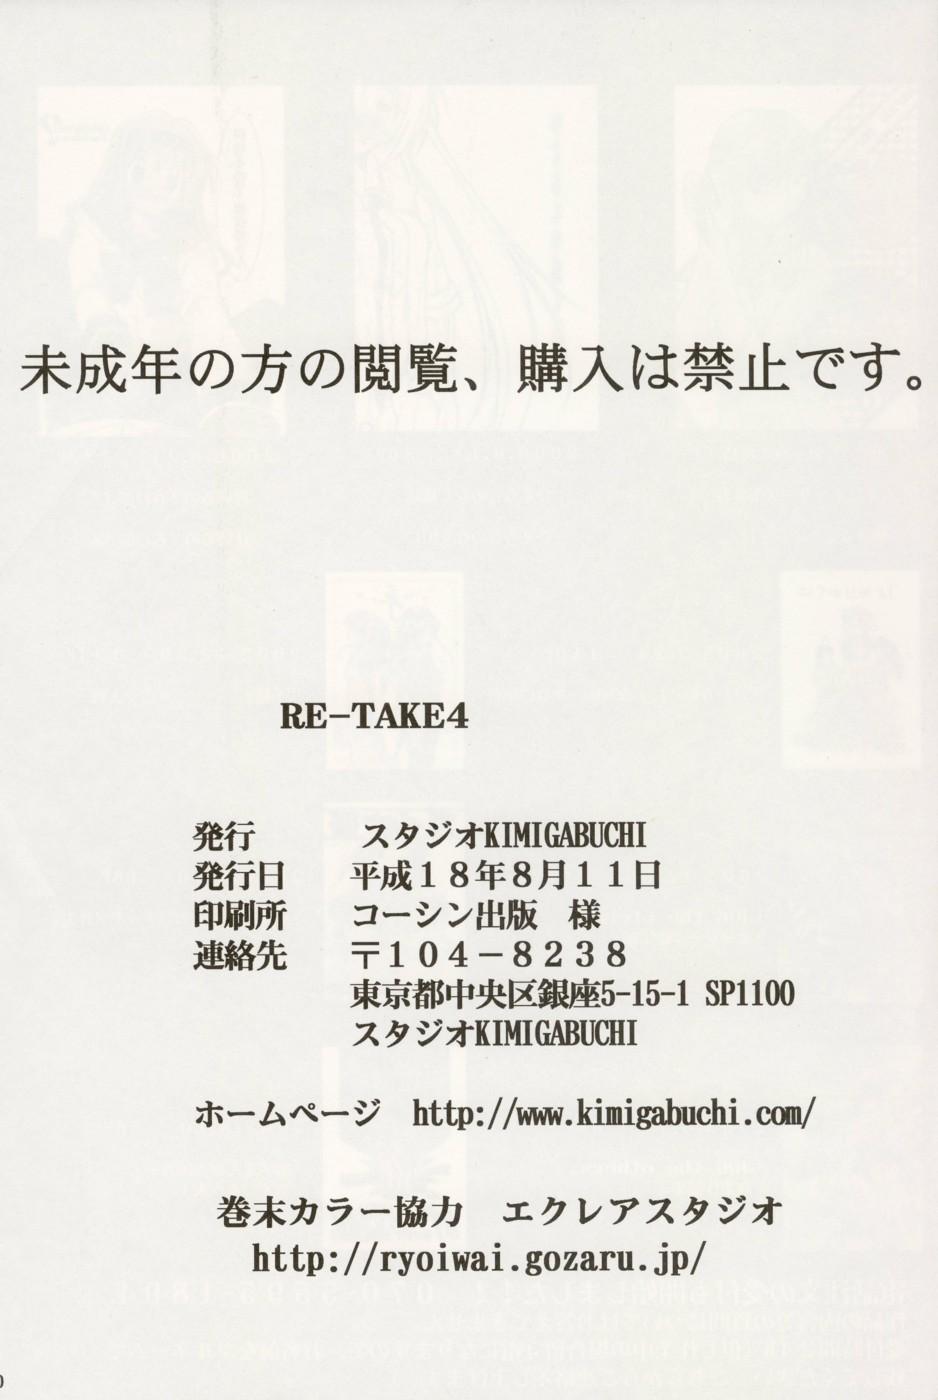 And RE-TAKE 4 - Neon genesis evangelion Tites - Page 205